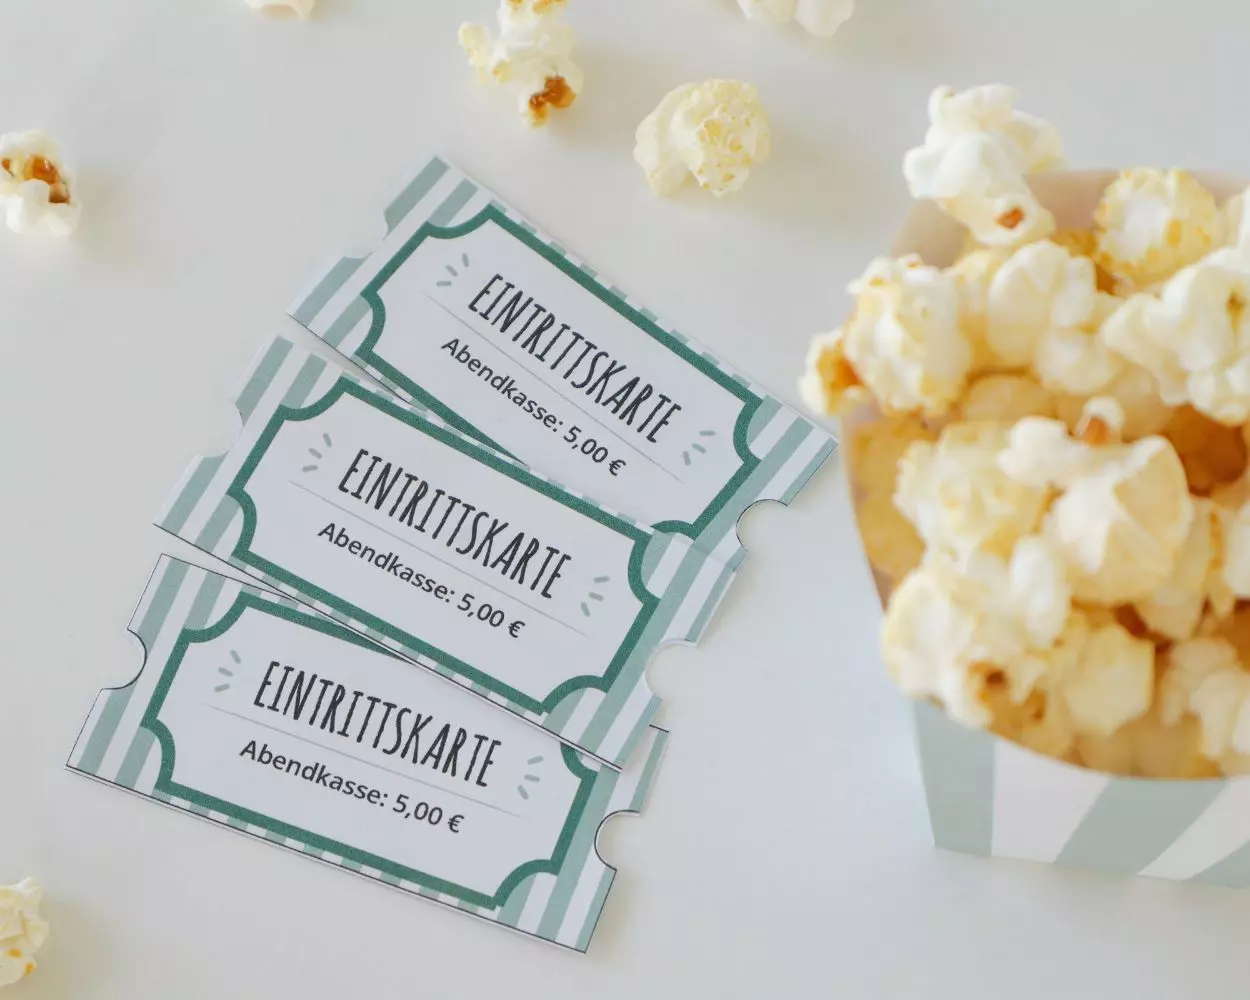 Make your own cinema tickets and popcorn bags - with free download